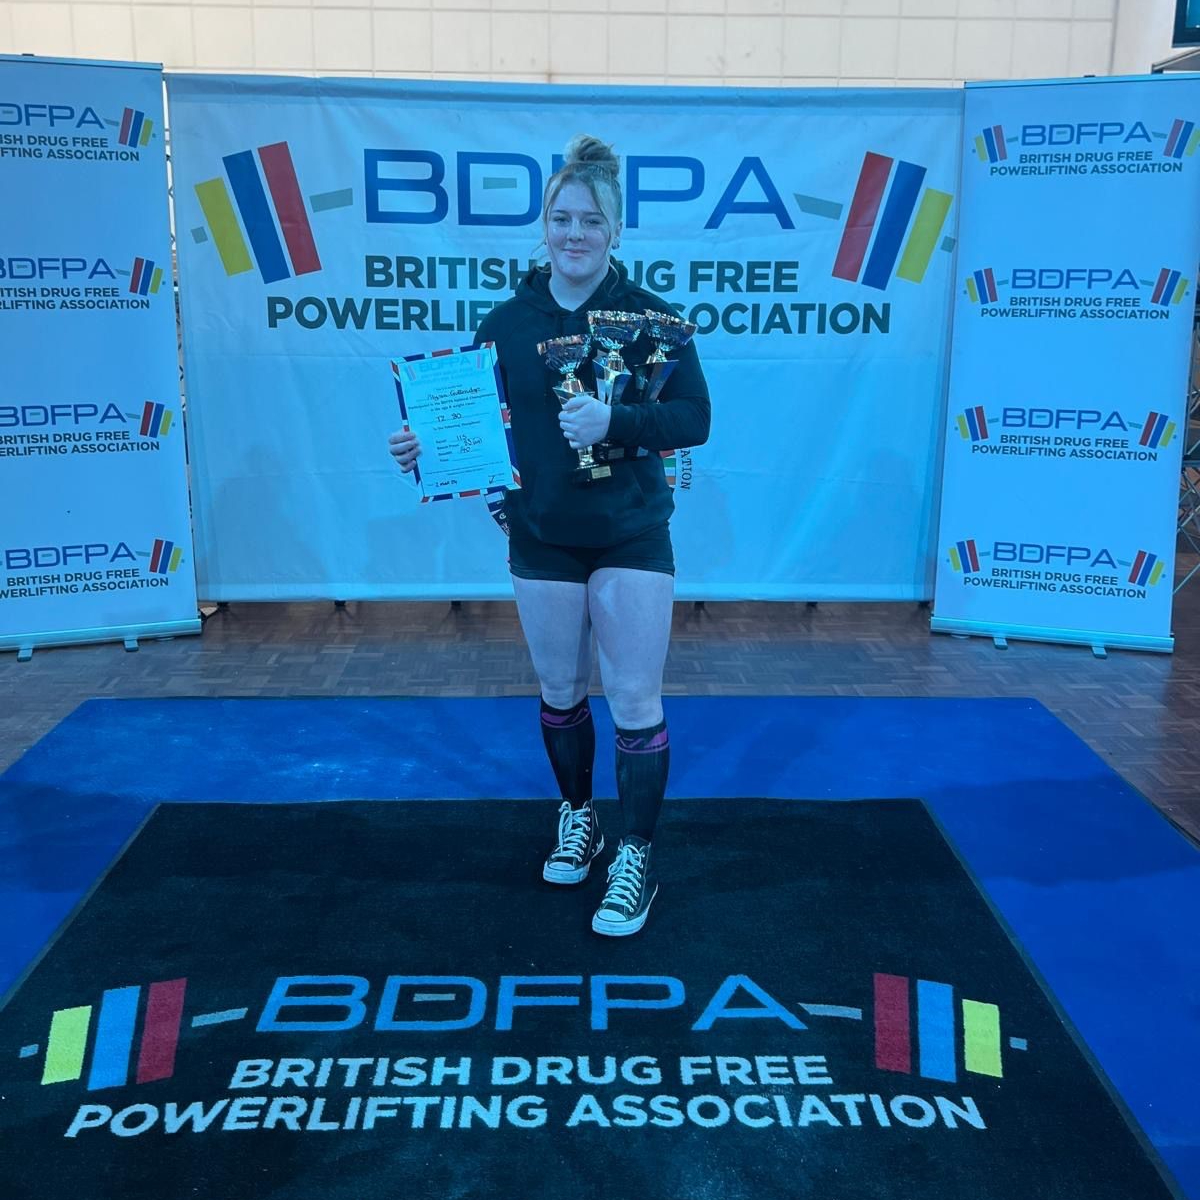 Alysia sets new Powerlifting World Record 🌎 🏅 and qualifies for the World Championships! Huge congratulations! 👏 we'll be cheering you on in the World Championships on 31st May in Amsterdam! 🌟 Read more camre.ac.uk/cambridge-regi… #WeAreCRC #PowerLifting #WorldChampionships